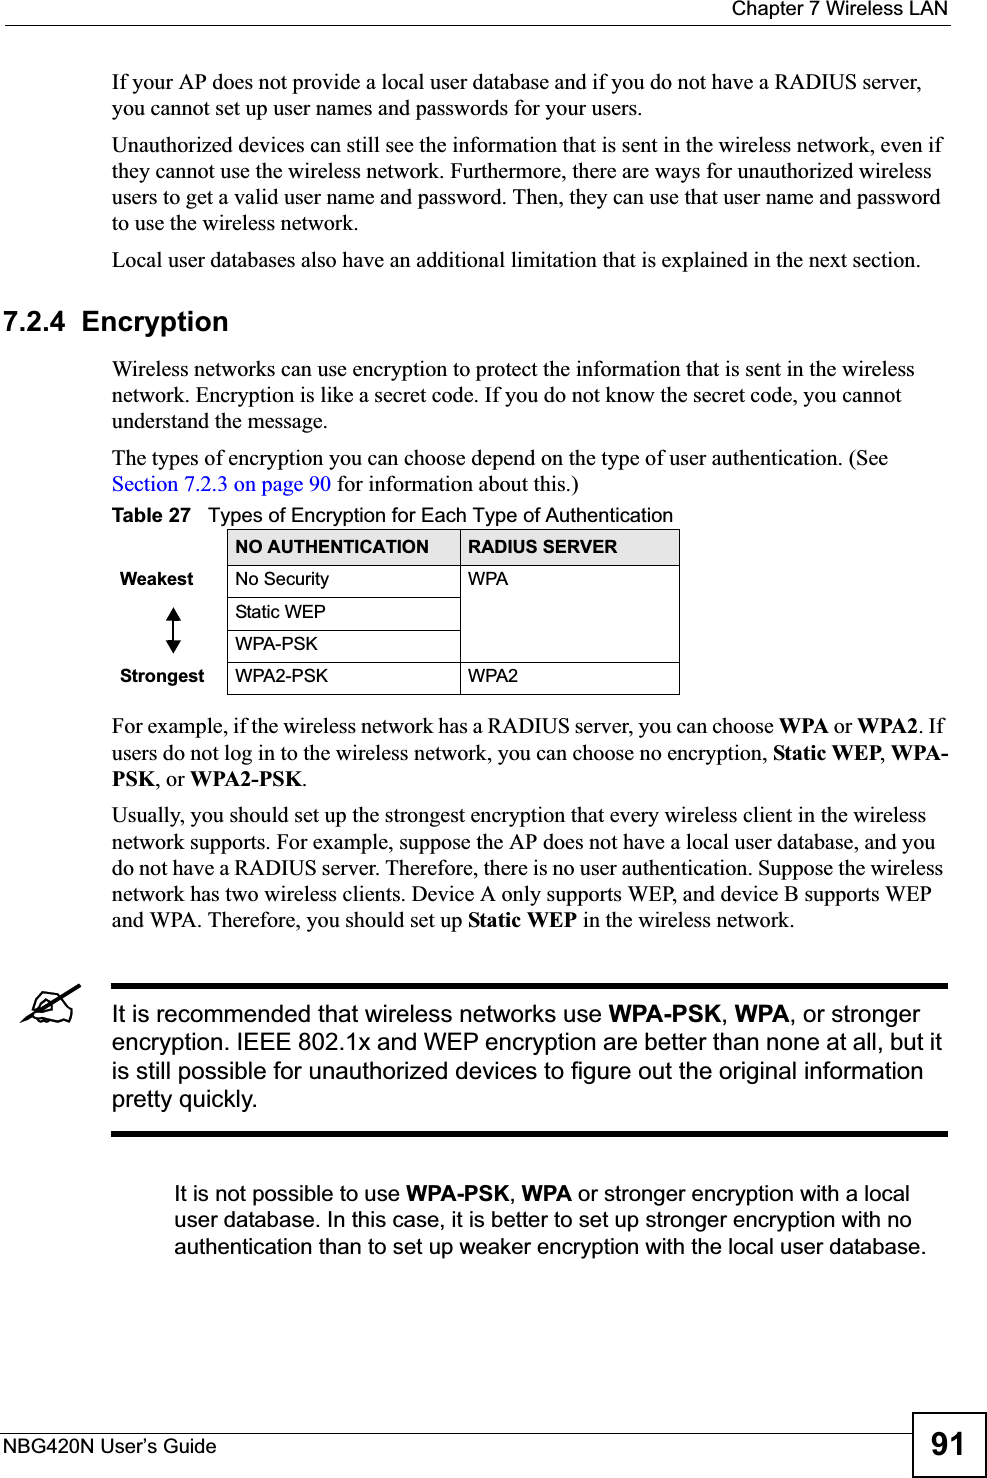  Chapter 7 Wireless LANNBG420N User’s Guide 91If your AP does not provide a local user database and if you do not have a RADIUS server, you cannot set up user names and passwords for your users.Unauthorized devices can still see the information that is sent in the wireless network, even if they cannot use the wireless network. Furthermore, there are ways for unauthorized wireless users to get a valid user name and password. Then, they can use that user name and password to use the wireless network.Local user databases also have an additional limitation that is explained in the next section.7.2.4  EncryptionWireless networks can use encryption to protect the information that is sent in the wireless network. Encryption is like a secret code. If you do not know the secret code, you cannot understand the message.The types of encryption you can choose depend on the type of user authentication. (See Section 7.2.3 on page 90 for information about this.)For example, if the wireless network has a RADIUS server, you can choose WPA or WPA2. If users do not log in to the wireless network, you can choose no encryption, Static WEP,WPA-PSK, or WPA2-PSK.Usually, you should set up the strongest encryption that every wireless client in the wireless network supports. For example, suppose the AP does not have a local user database, and you do not have a RADIUS server. Therefore, there is no user authentication. Suppose the wireless network has two wireless clients. Device A only supports WEP, and device B supports WEP and WPA. Therefore, you should set up Static WEP in the wireless network.&quot;It is recommended that wireless networks use WPA-PSK,WPA, or stronger encryption. IEEE 802.1x and WEP encryption are better than none at all, but it is still possible for unauthorized devices to figure out the original information pretty quickly.It is not possible to use WPA-PSK,WPA or stronger encryption with a local user database. In this case, it is better to set up stronger encryption with no authentication than to set up weaker encryption with the local user database.Table 27   Types of Encryption for Each Type of AuthenticationNO AUTHENTICATION RADIUS SERVERWeakest No Security WPAStatic WEPWPA-PSKStrongest WPA2-PSK WPA2